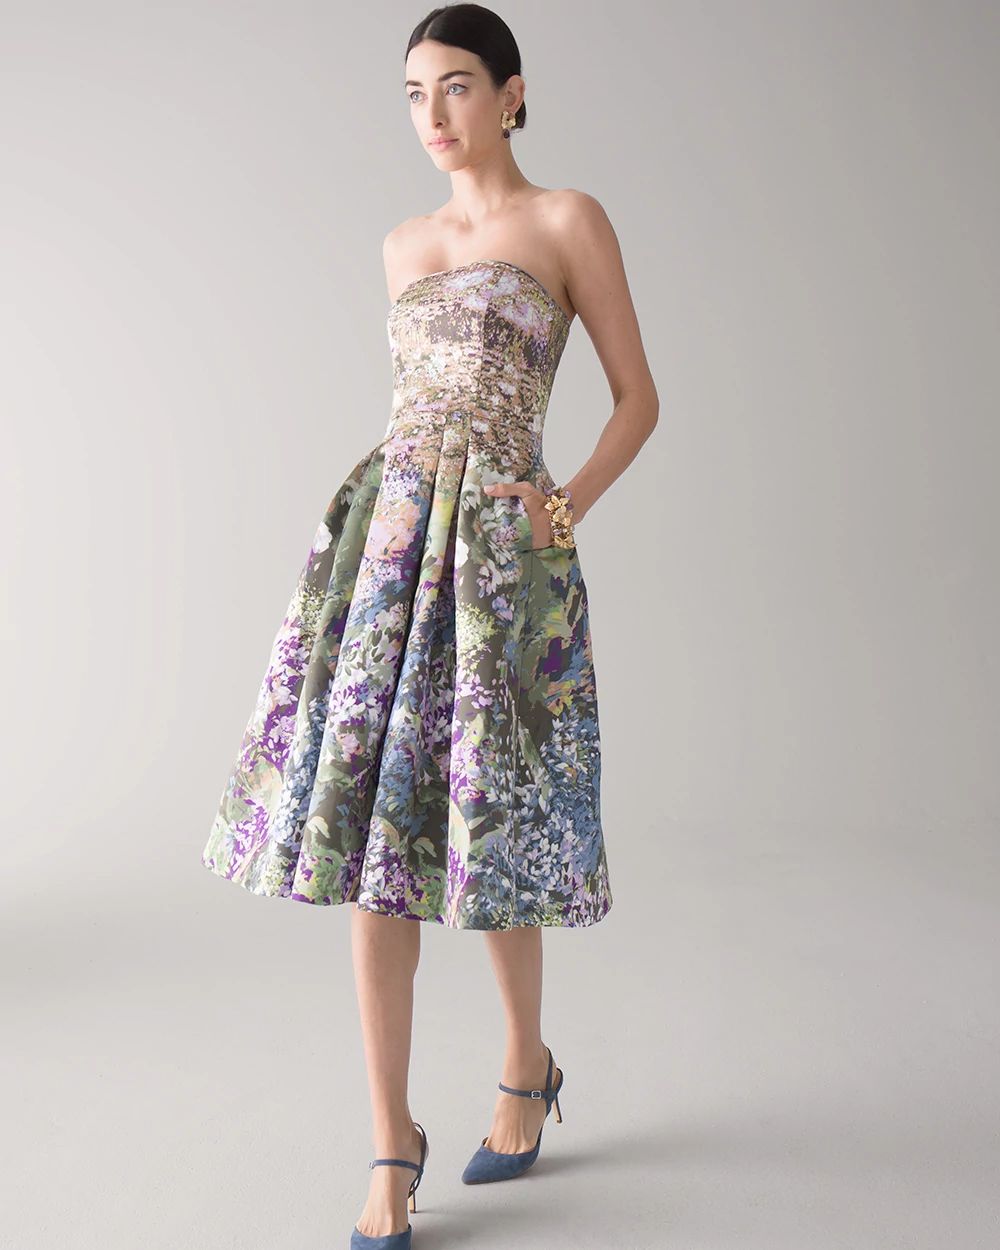 Strapless Watercolor Print Fit & Flare Dress click to view larger image.